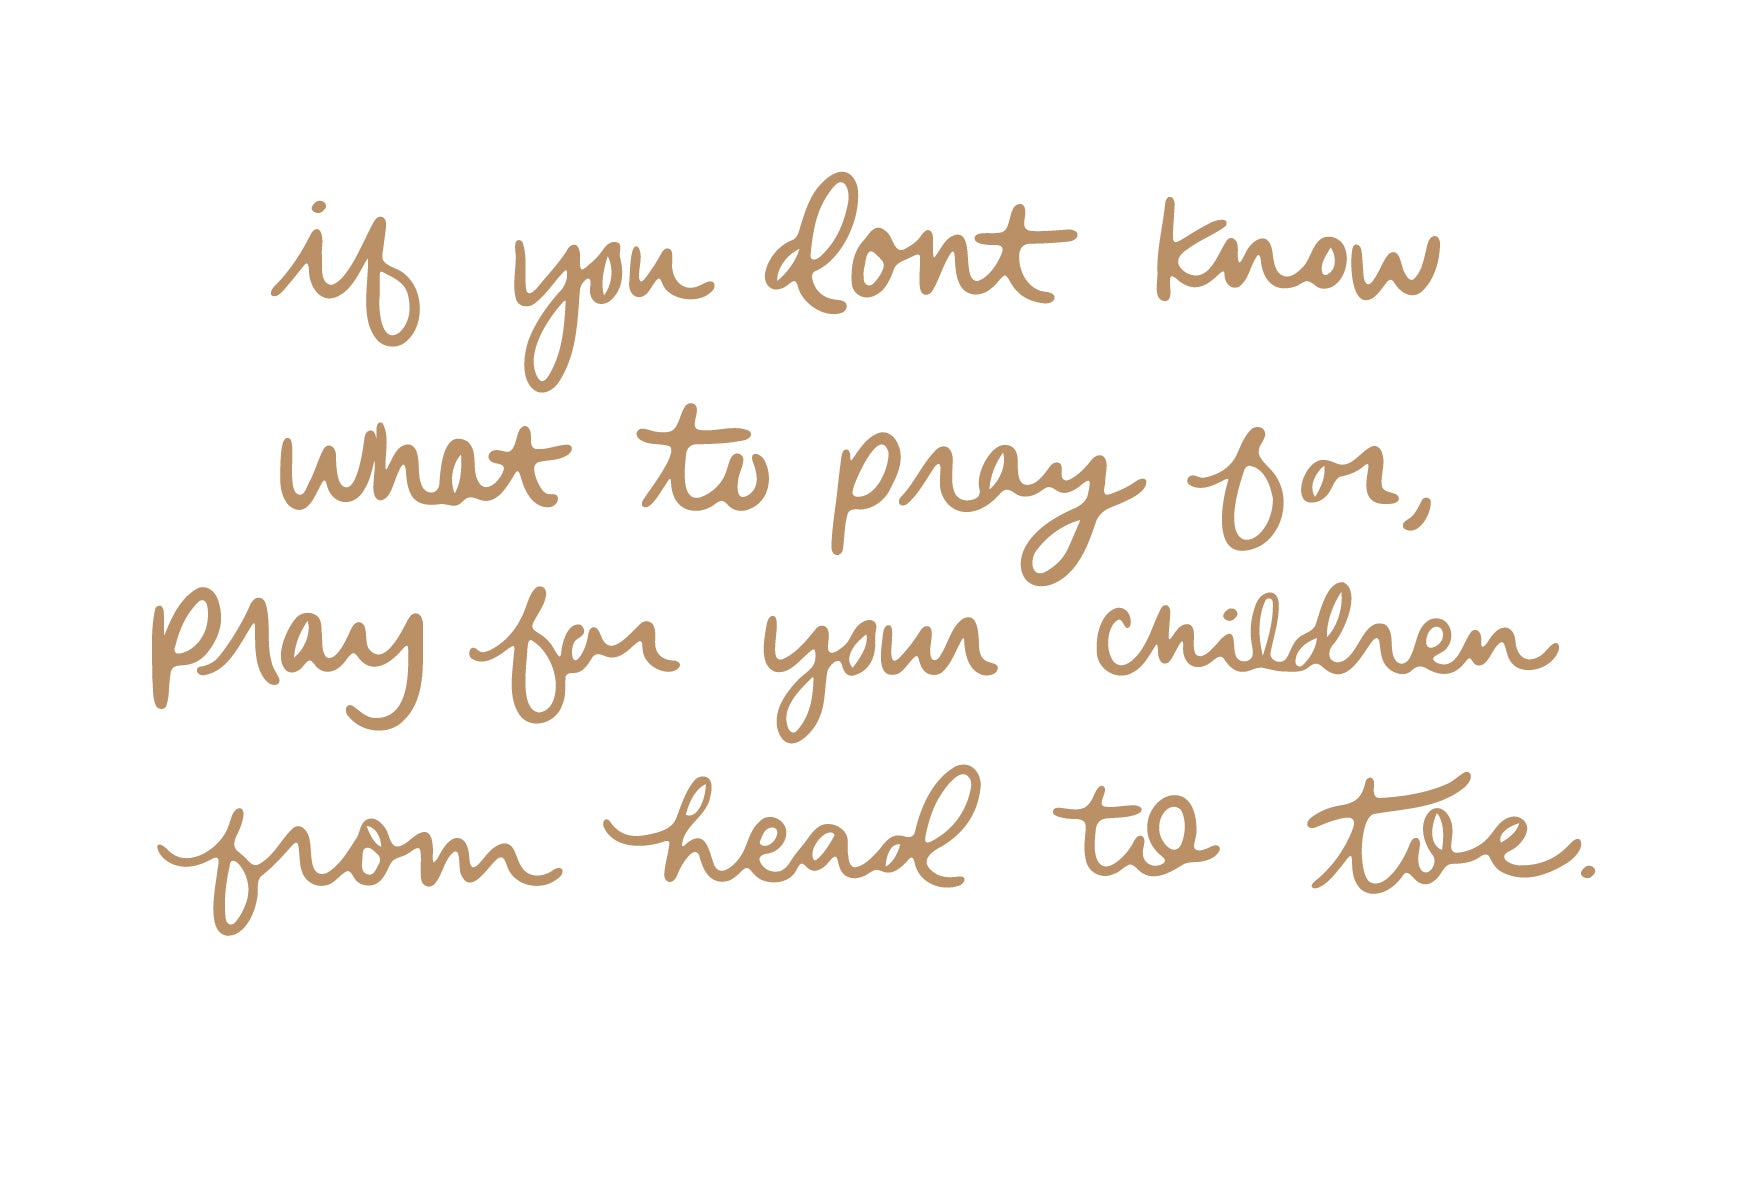 Pray for your children from head to toe | TDGC